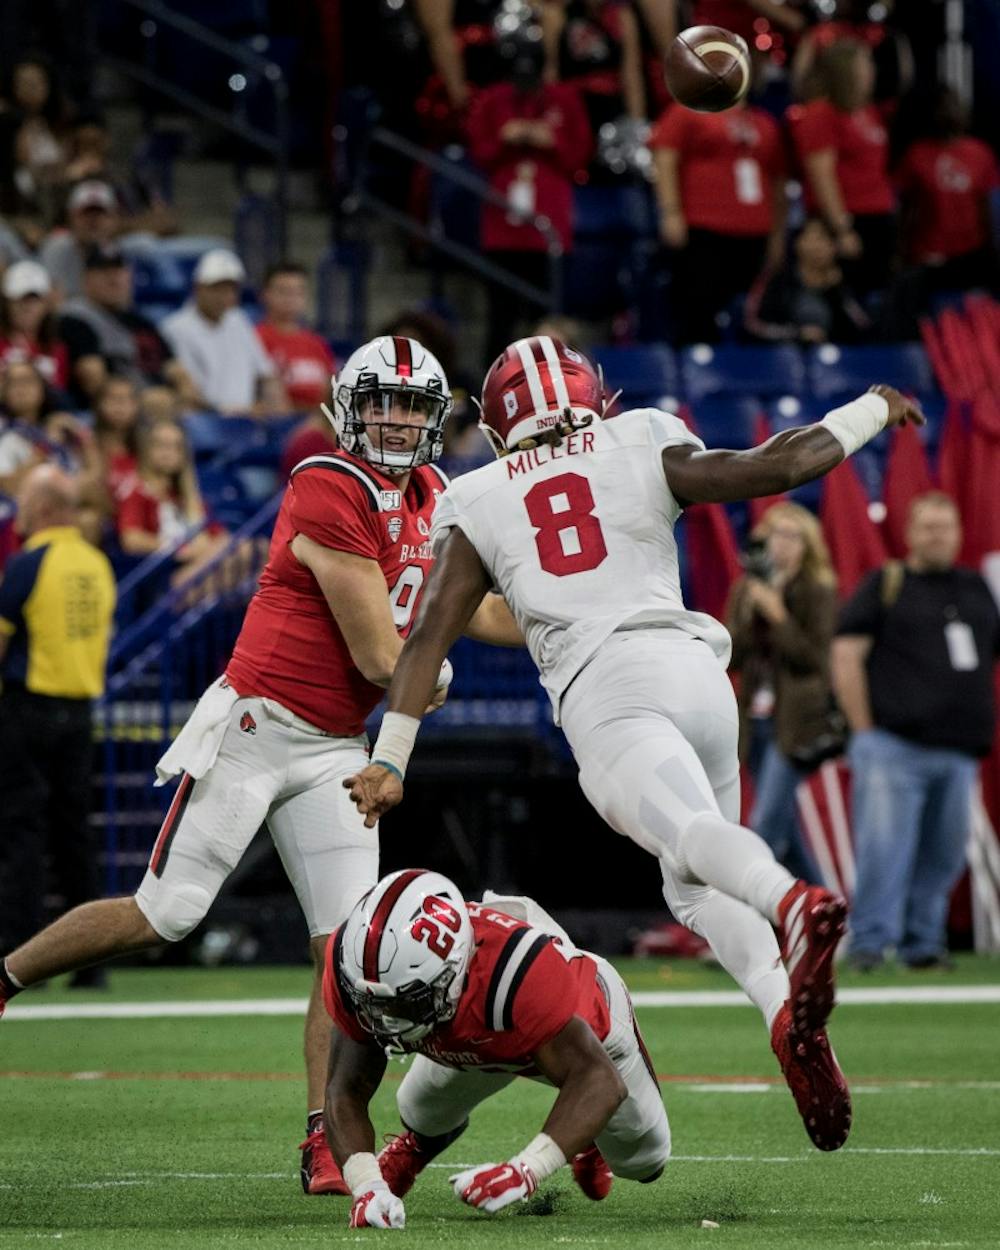 <p>Ball State redshirt junior quarterback Drew Plitt throws a pass as an Indiana defender breaks past the line of scrimmage Aug. 31, 2019, in Lucas Oil Stadium in Indianapolis. After a close first half, Indiana walked away defeating the Cardinals, 34-24, in the season opener. <strong>Eric Pritchett, DN</strong></p>